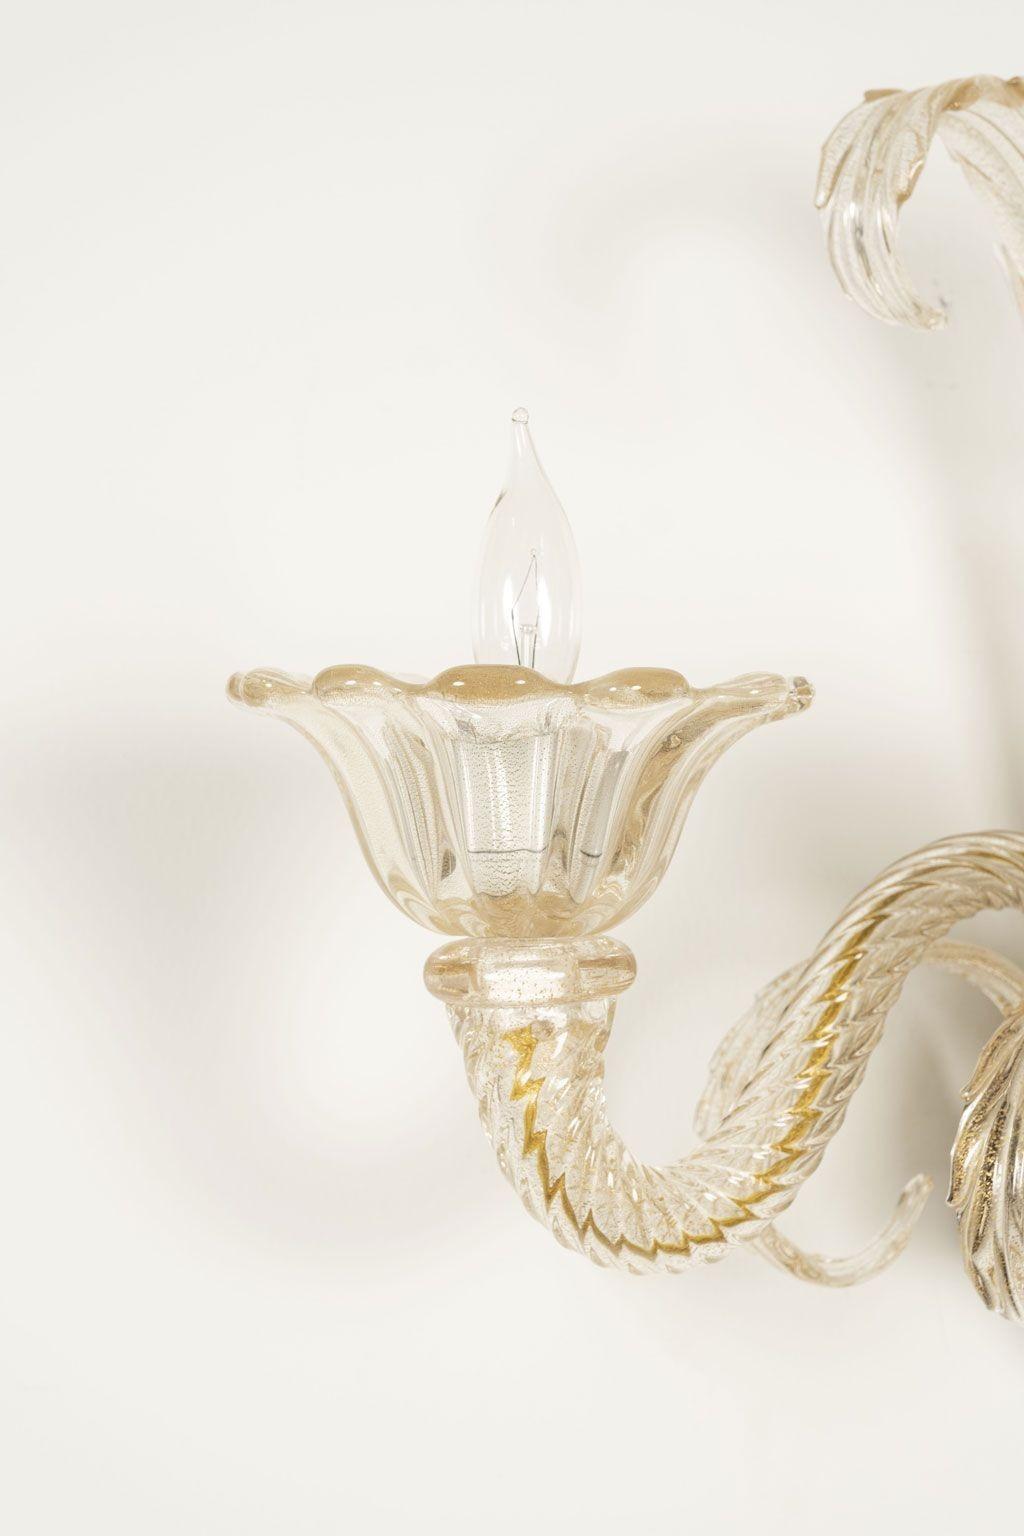 Pair of vintage hand-blown Murano clear sconces. Clear hand-blown Murano glass with subtle gold flecks. Wired for use within the USA - includes back plate. Each arm accommodates a candelabra-size bulb. Sold together priced $4,400 for the pair.